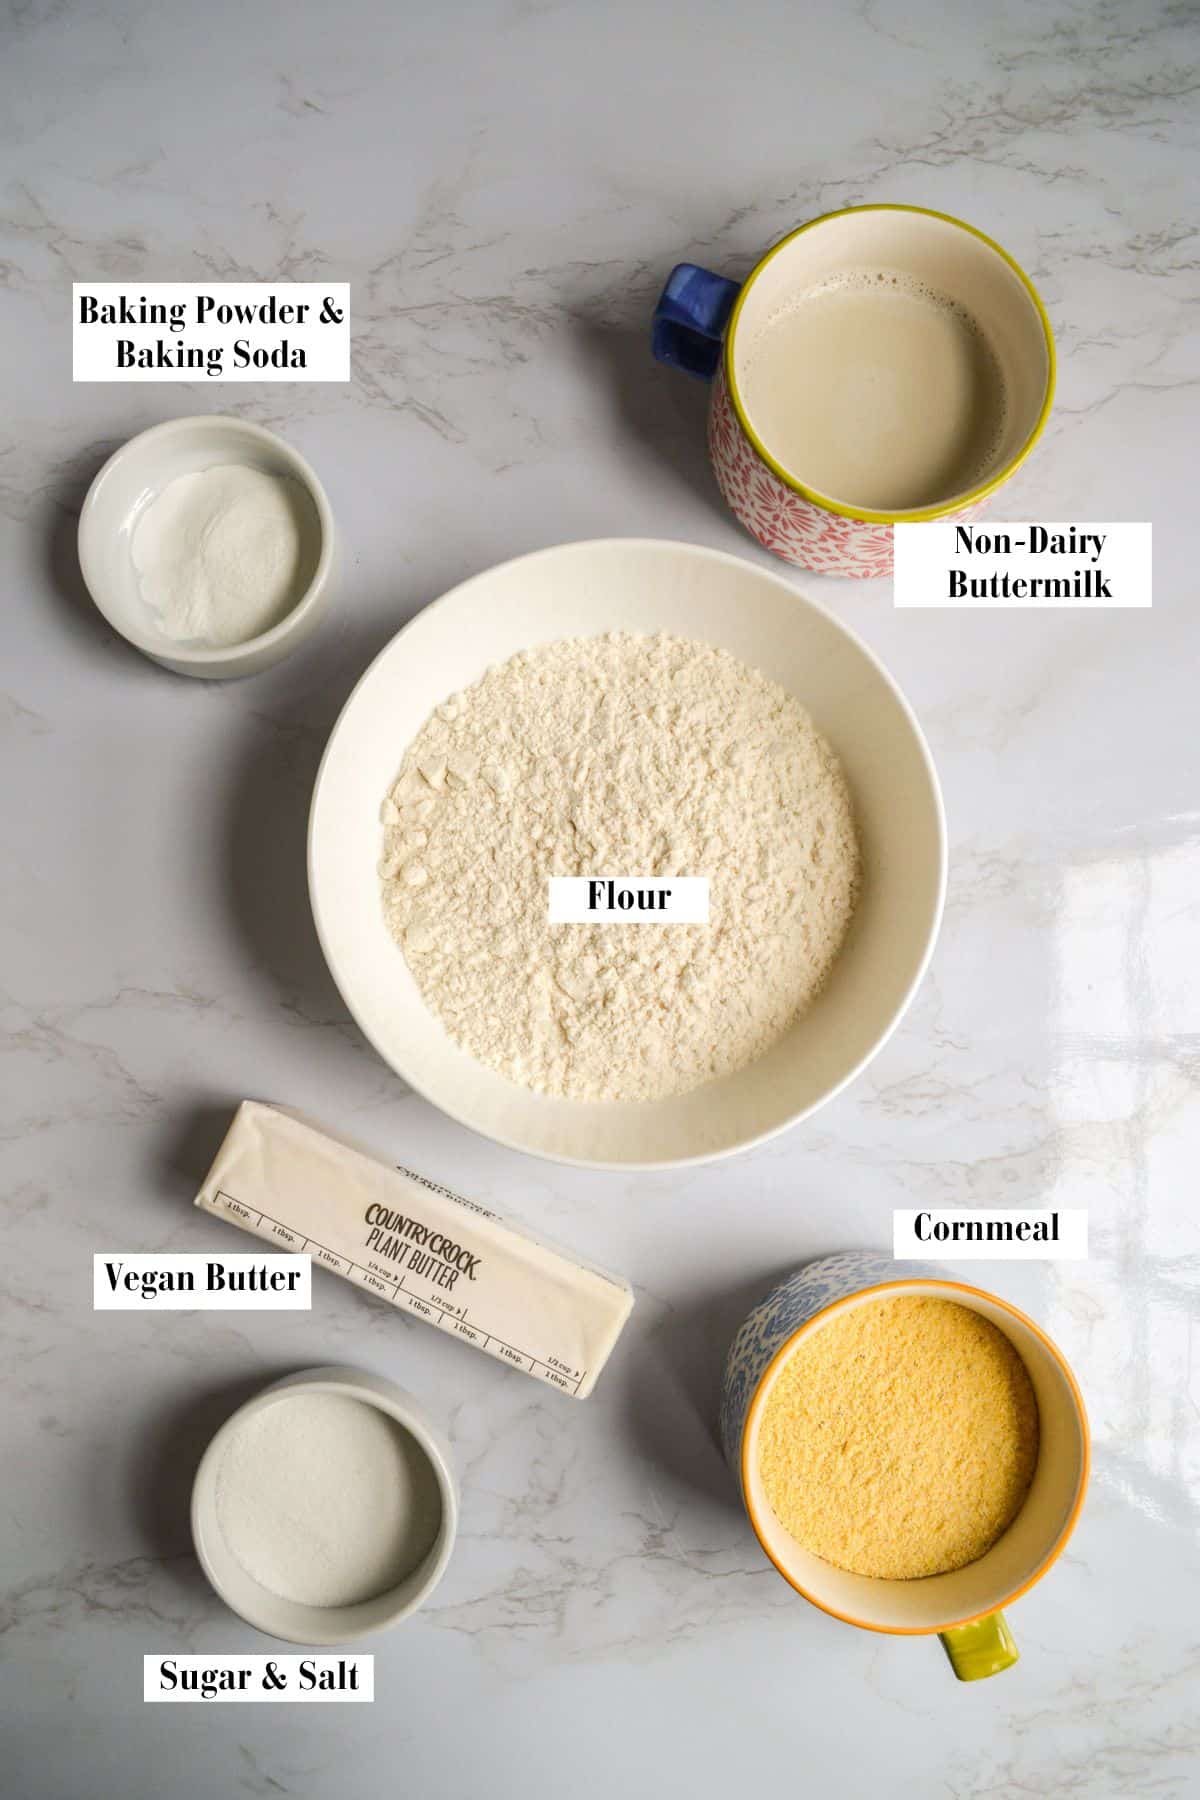 Ingredients for making vegan cornmeal drop biscuits on a marble surface.